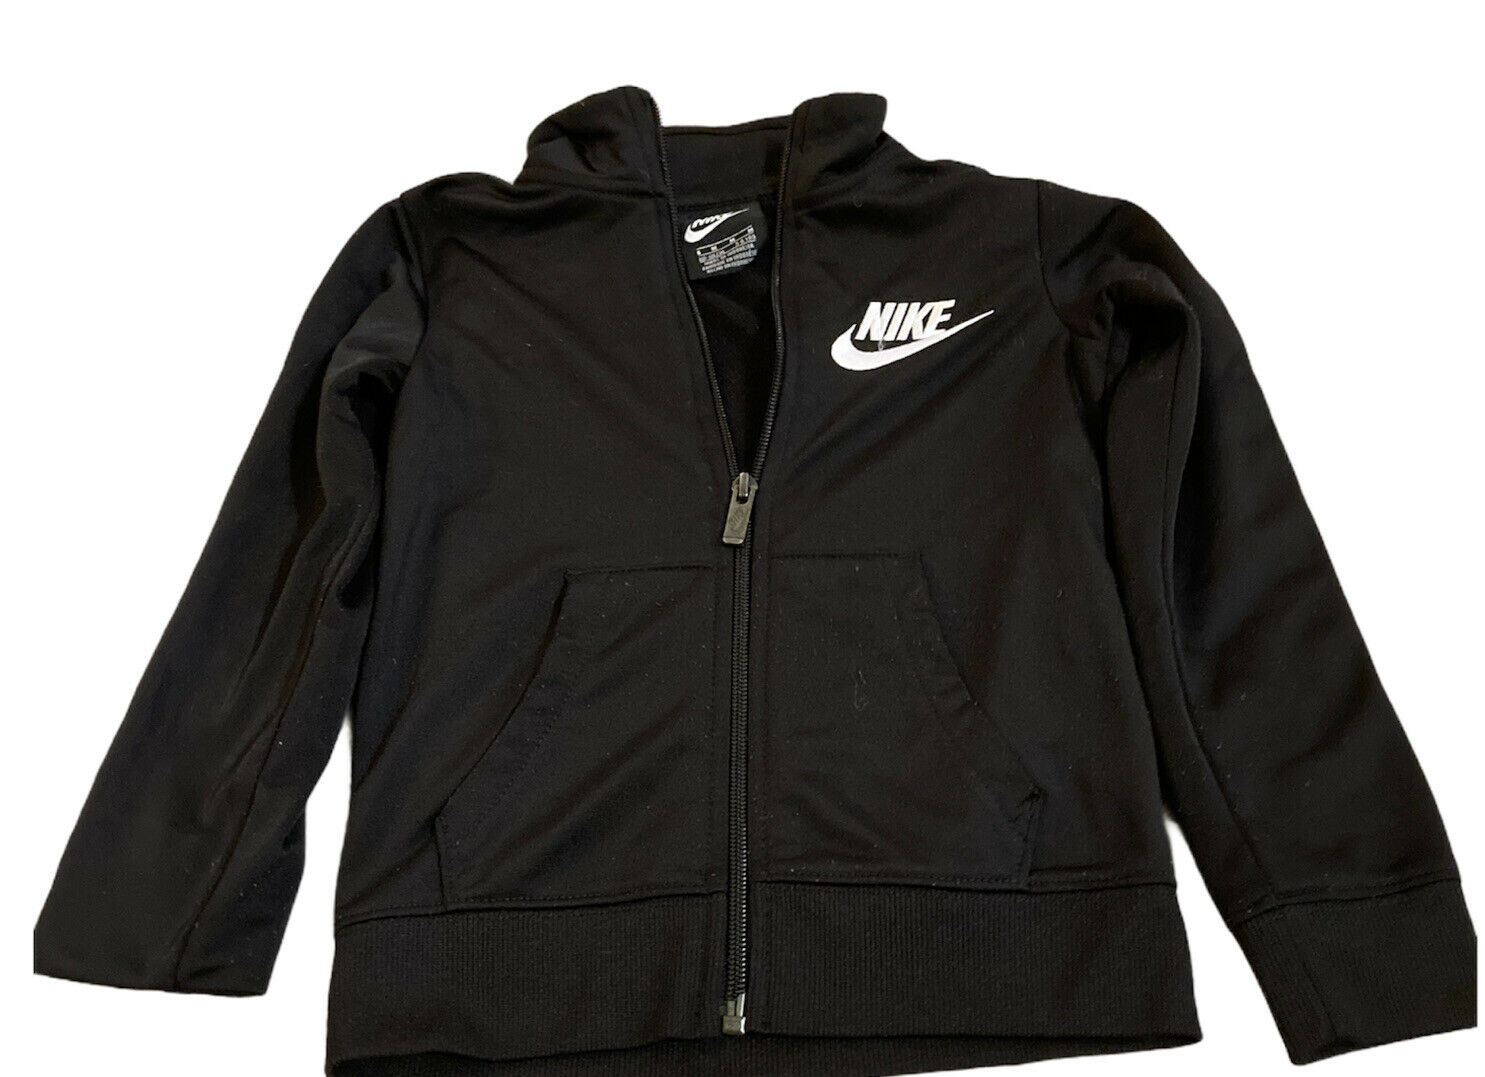 Toddler Dark Grey With Black Nike Zip Up Shirt Size 6/m With Pockets